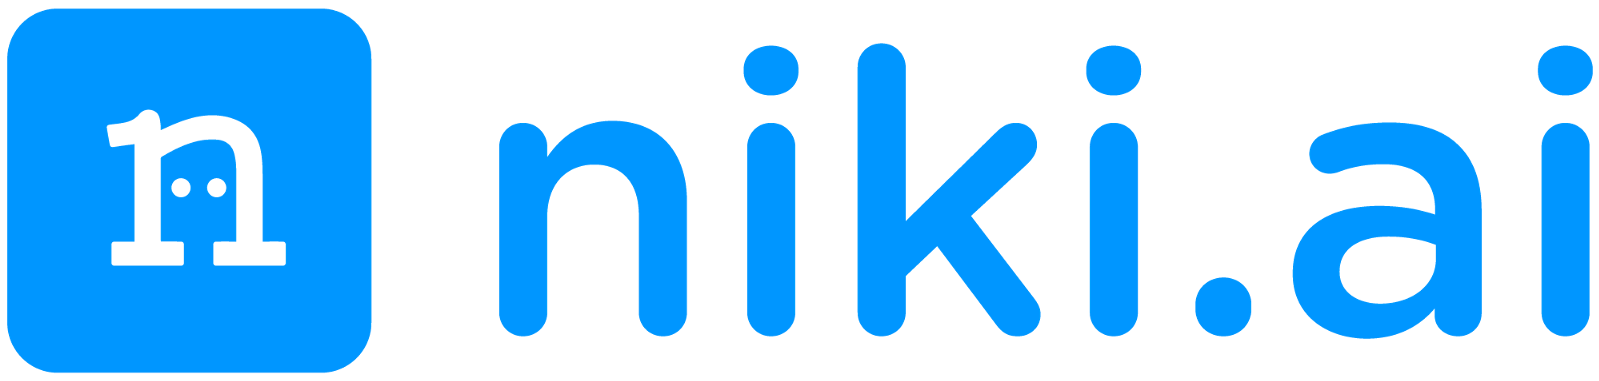 The product is an artificial intelligence-powered chatbot which works as an intelligent personal assistant, named Niki